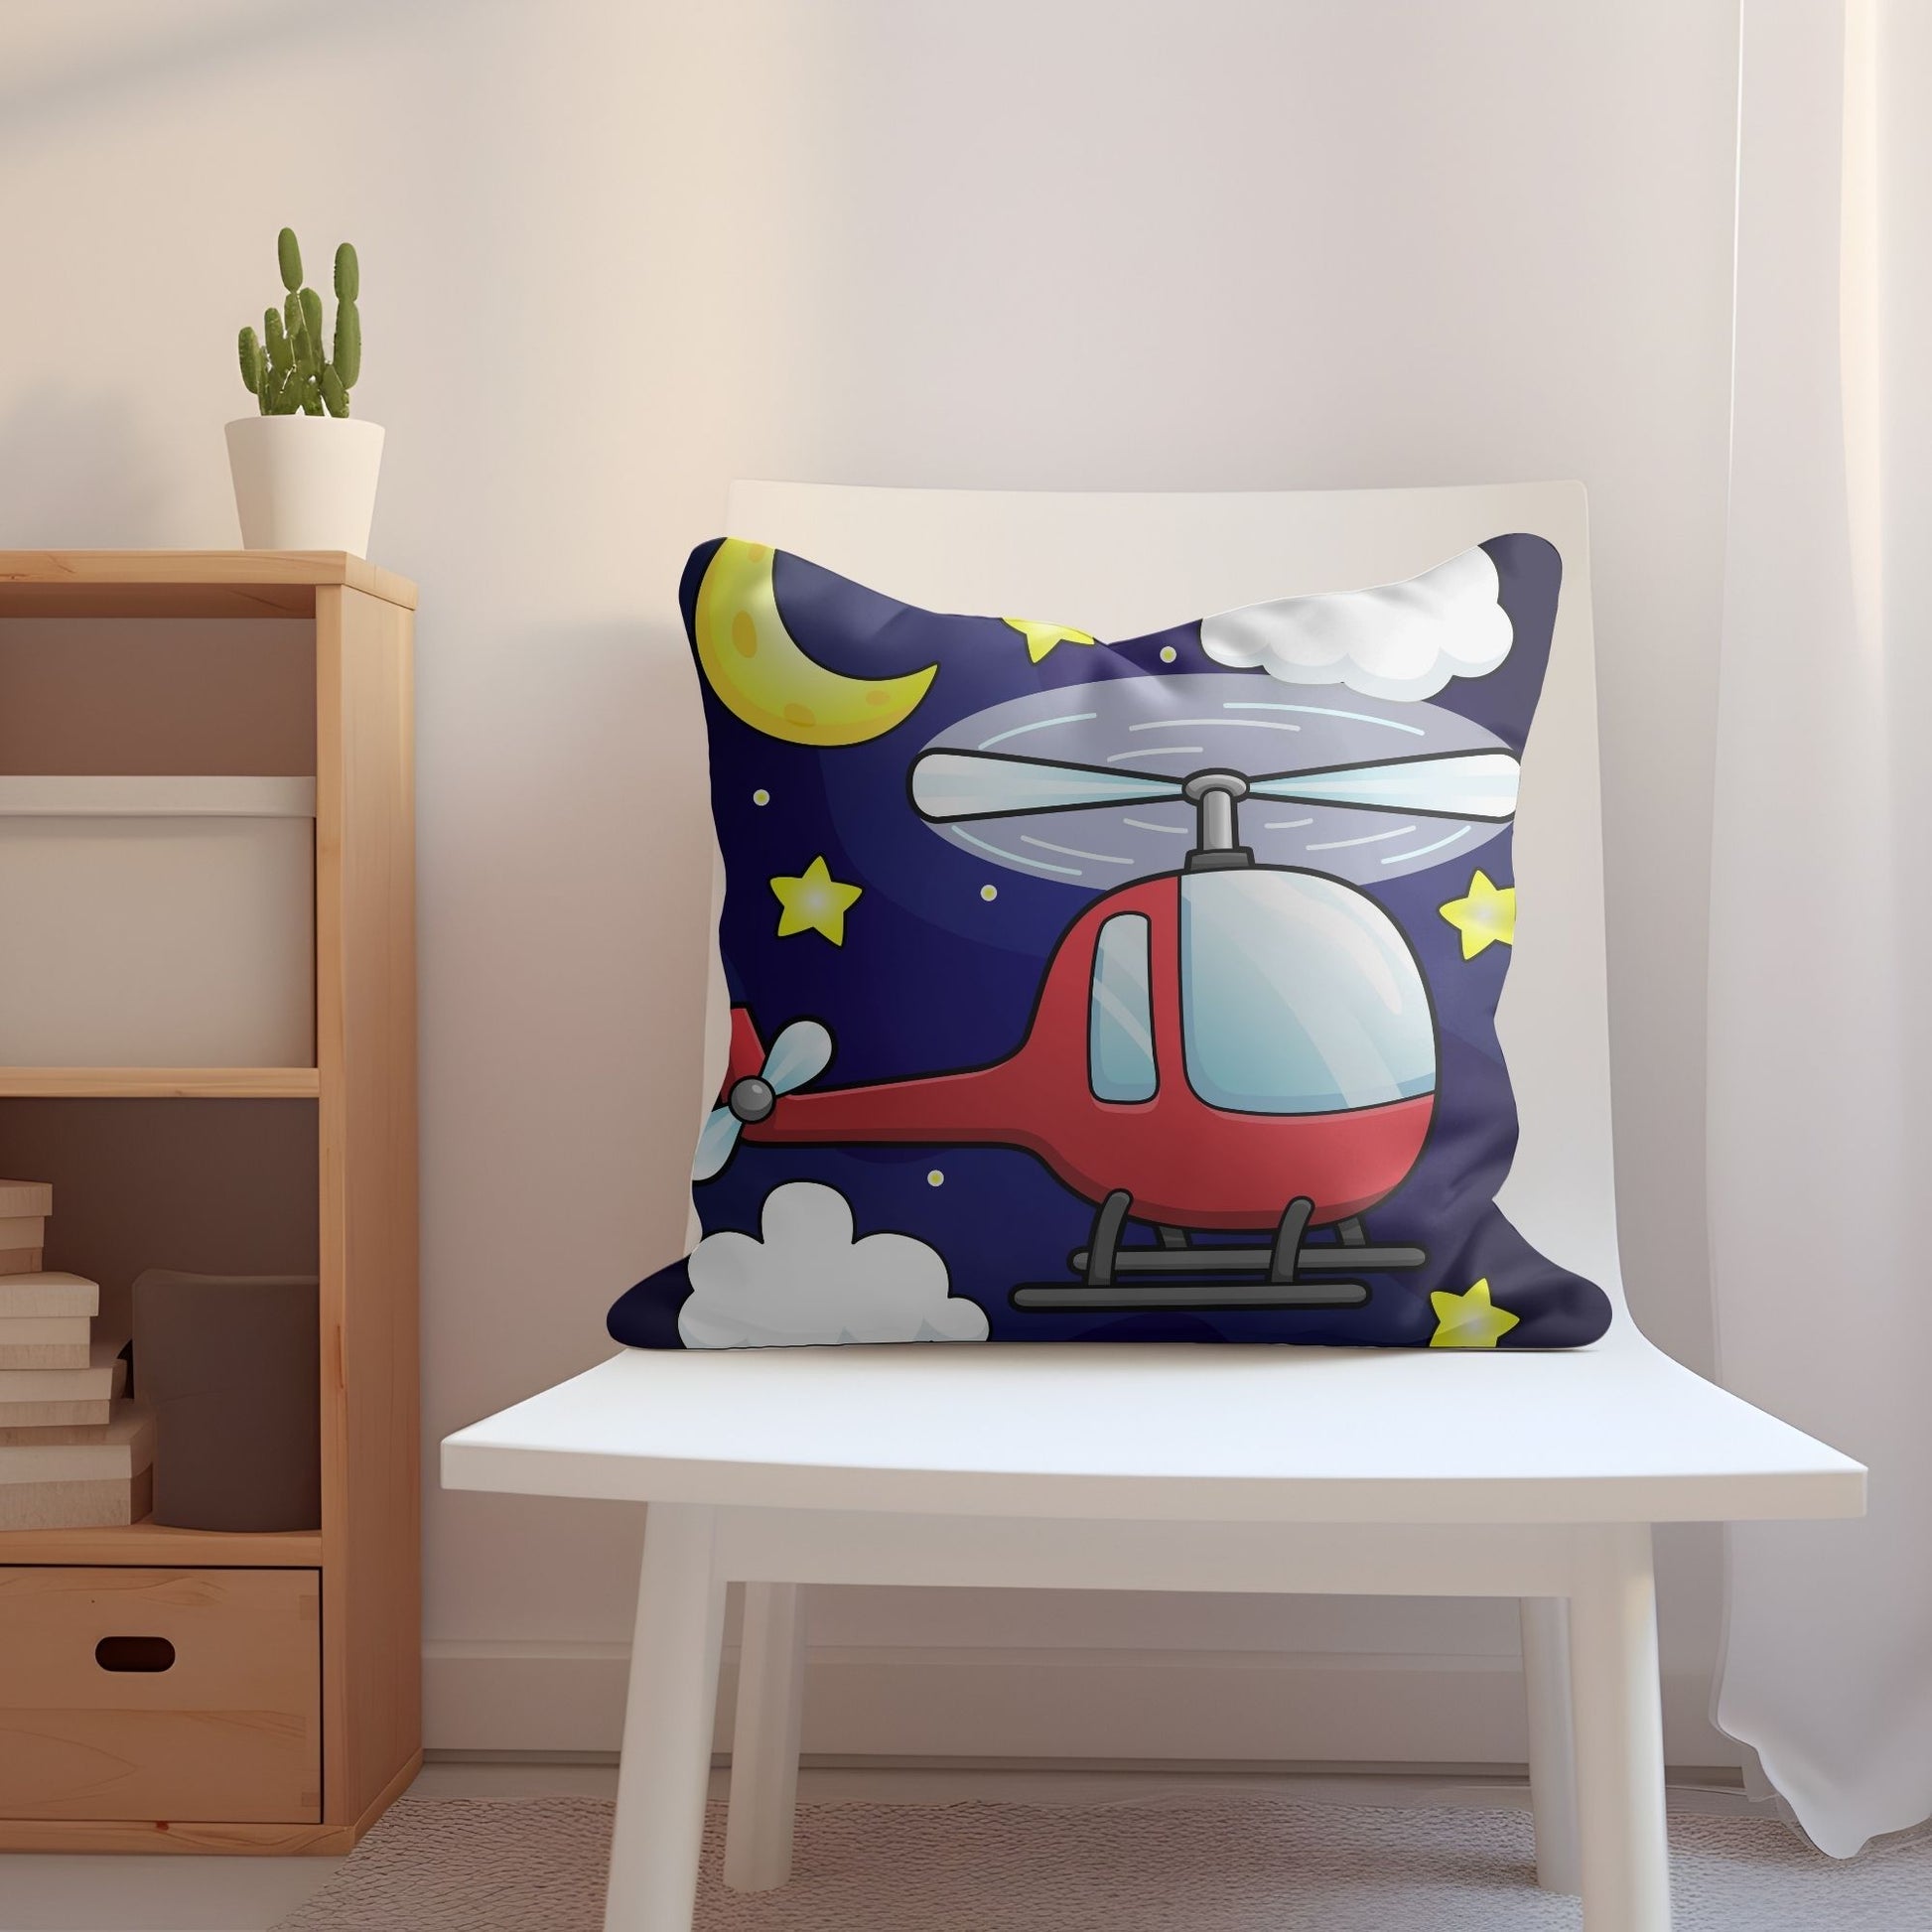 Cozy pillow with a charming red helicopter motif for children's comfort.